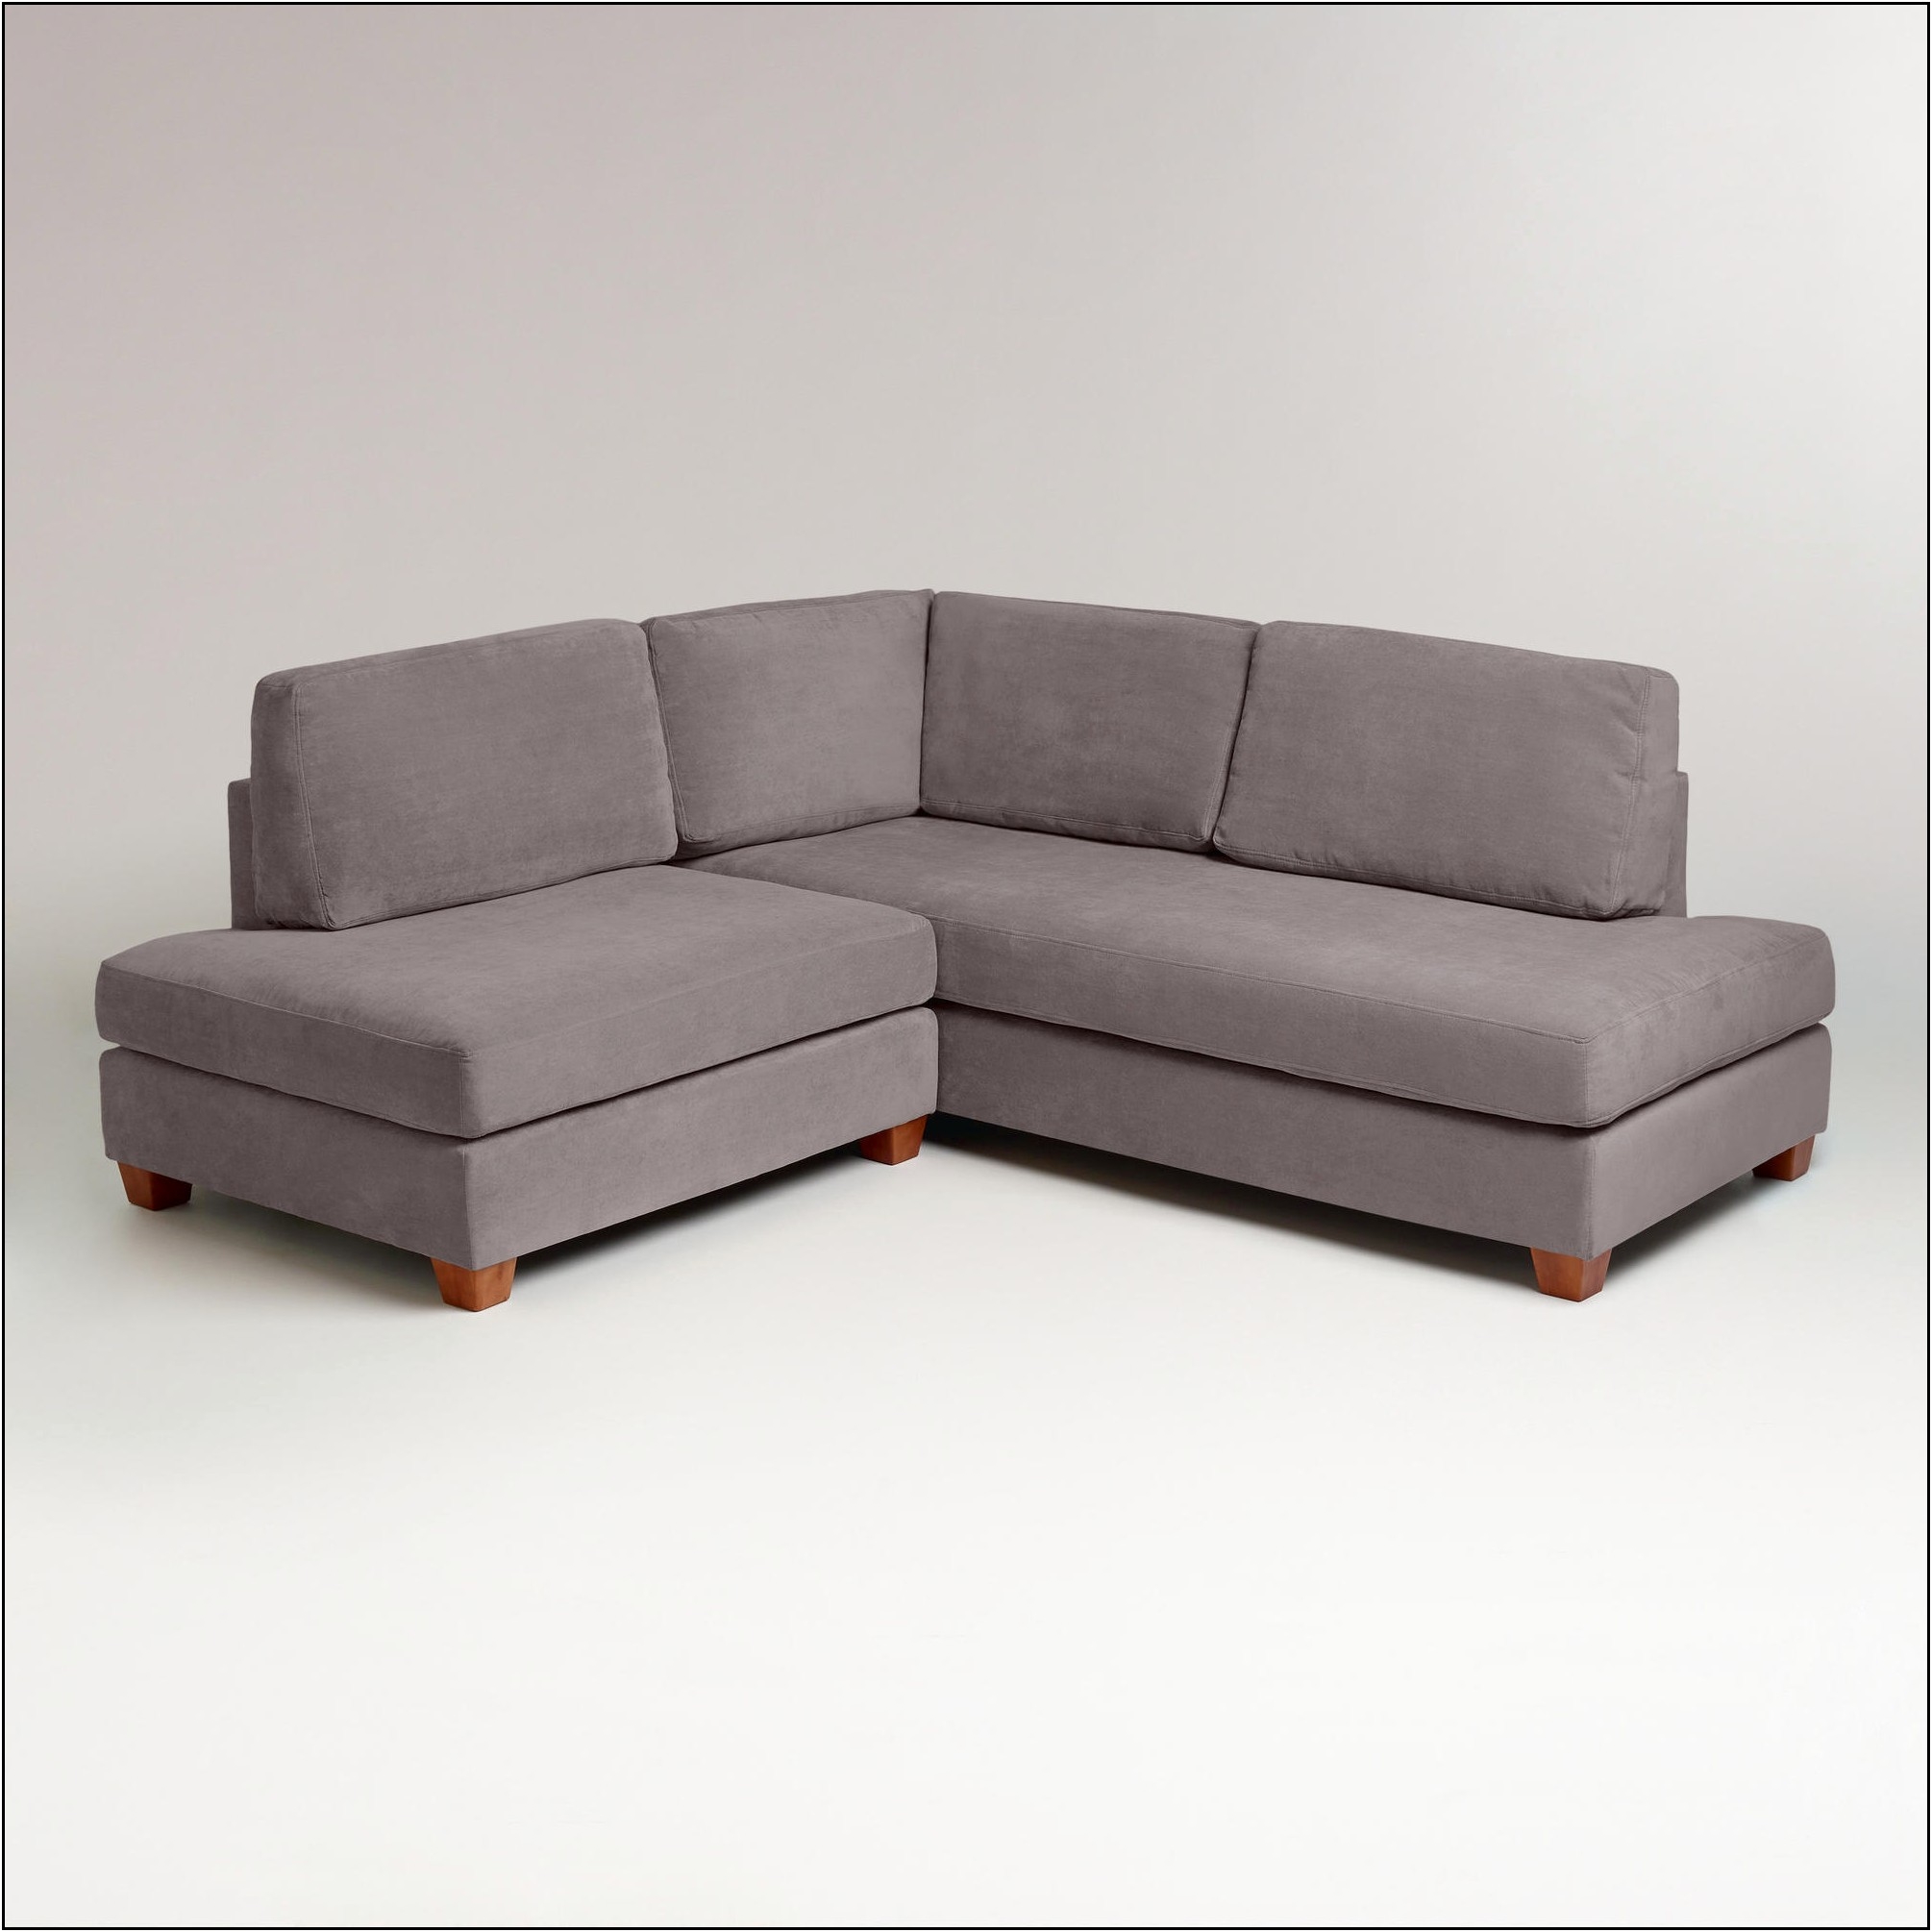 Recommendations for a small sectional sofa good questions apartment